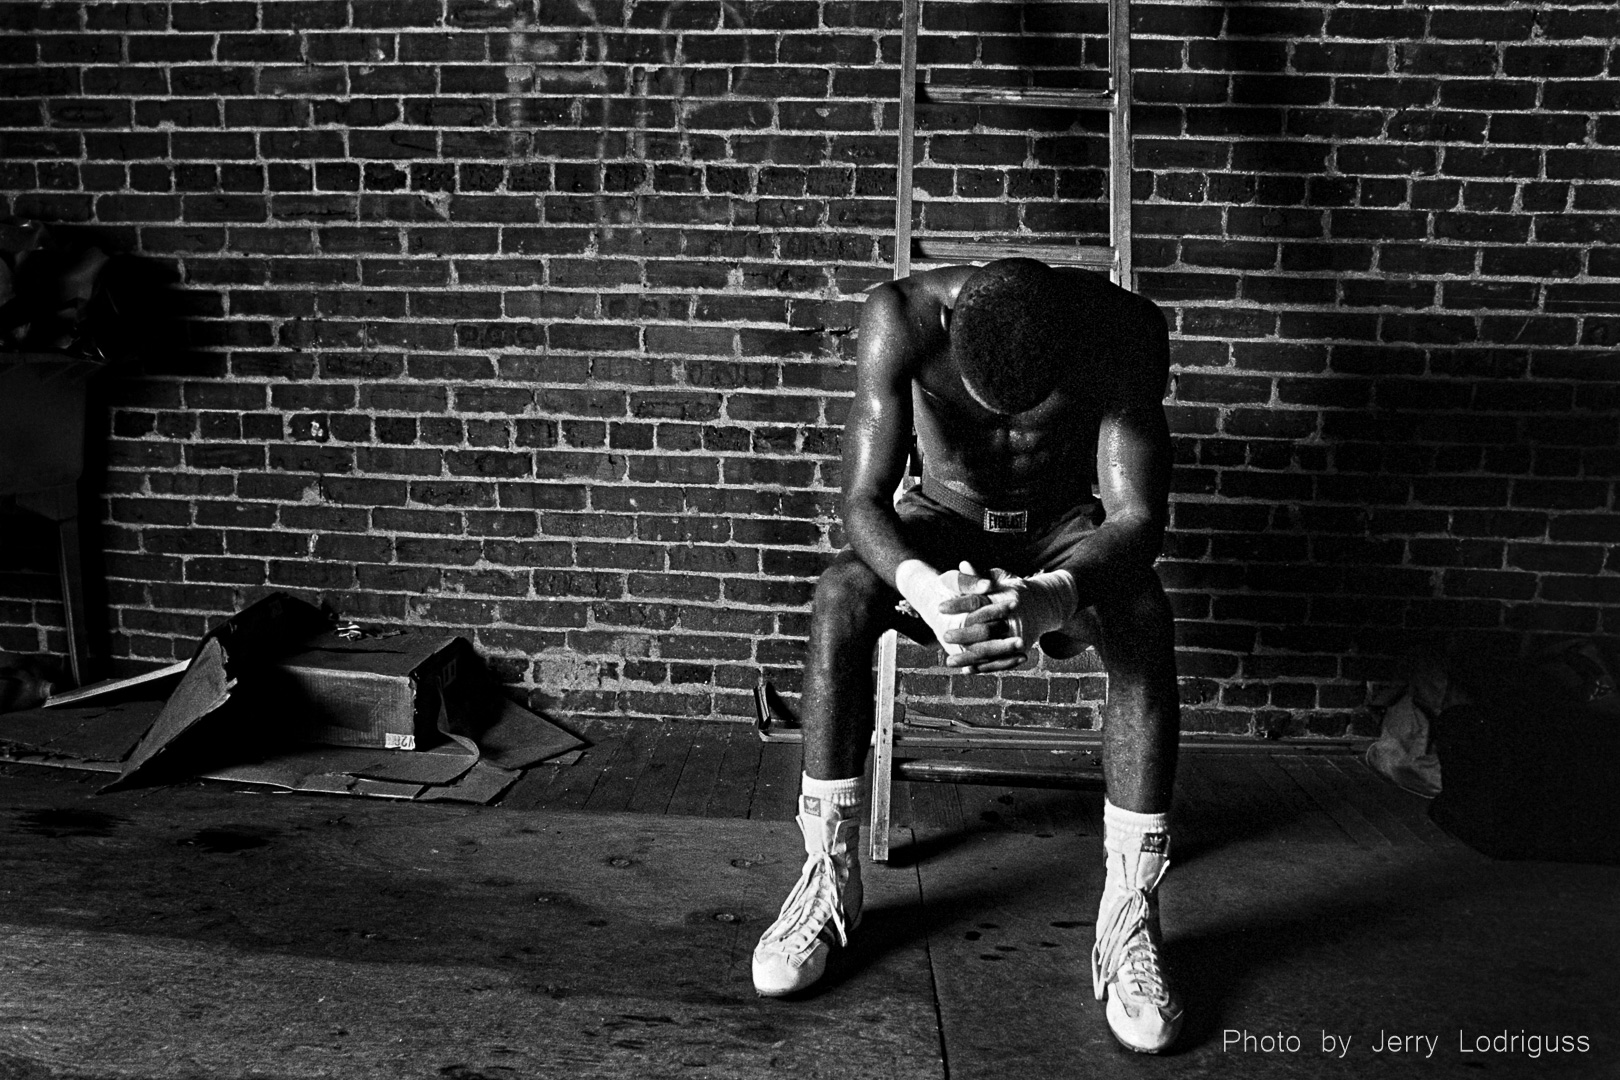 Upcoming yourg boxer Tony Green rests after a hard workout at Champ's gym in Philadelphia.